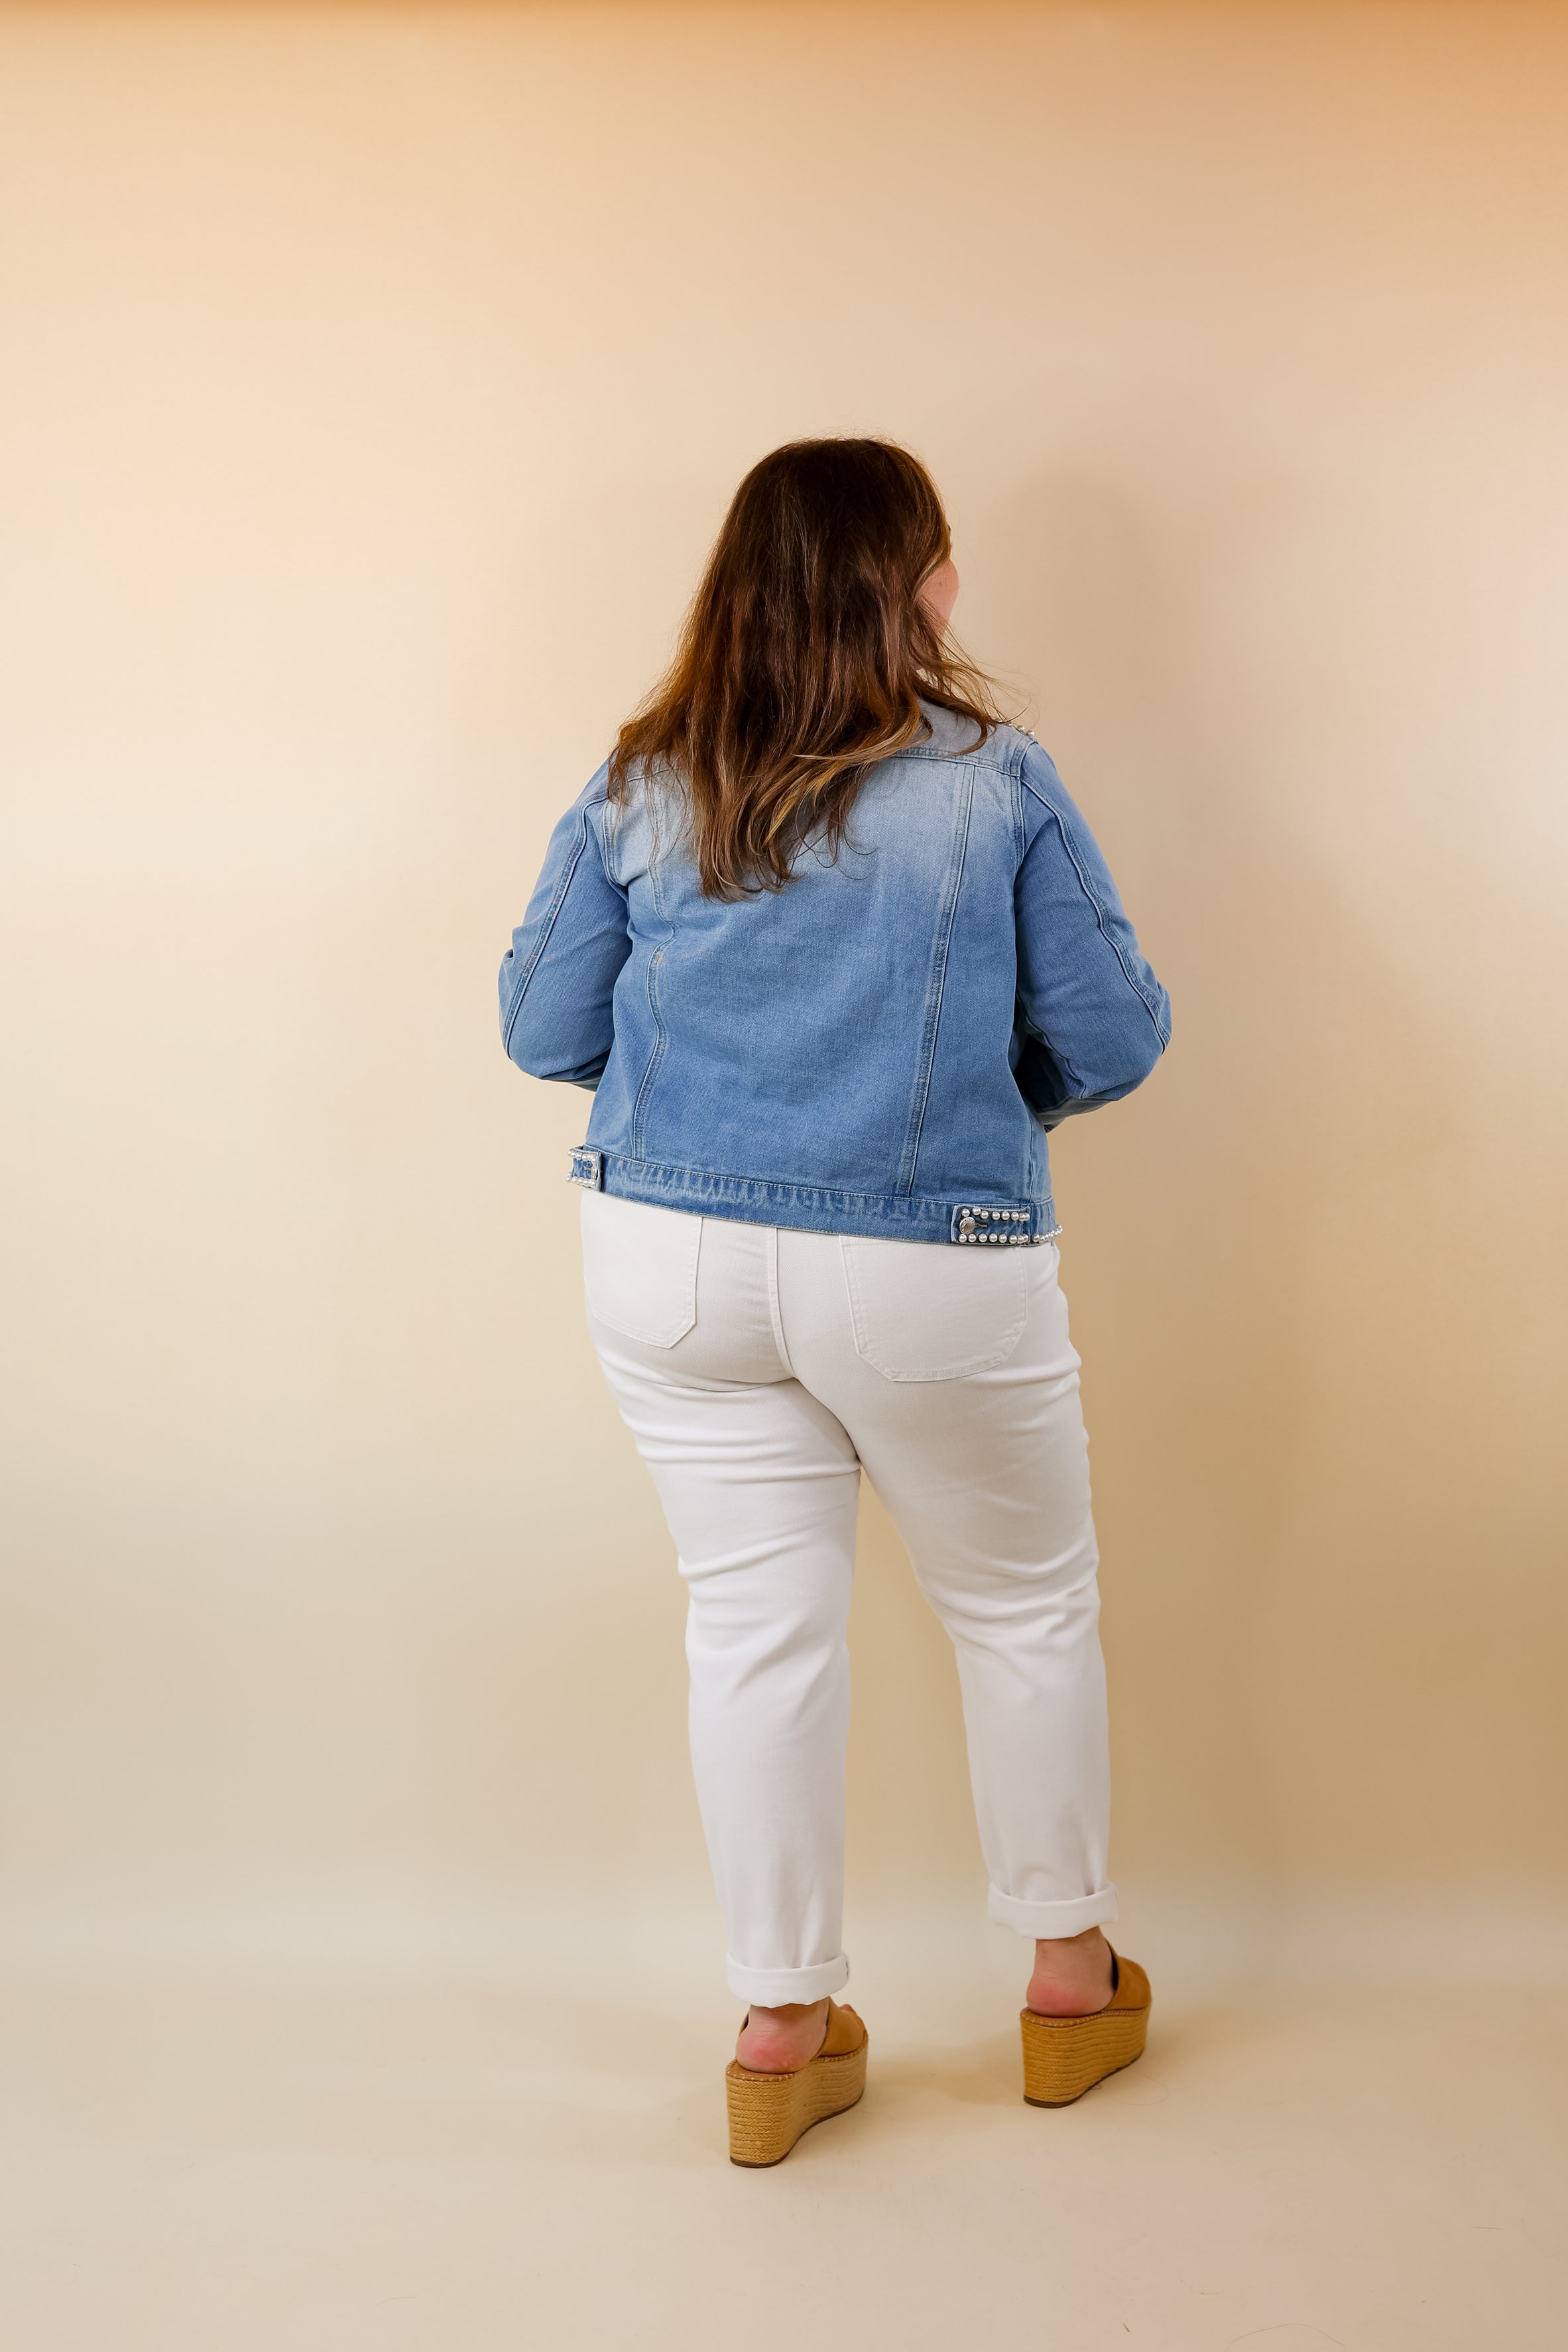 Pearls For the Girls Pearl Embellished Denim Jacket in Light Wash - Giddy Up Glamour Boutique